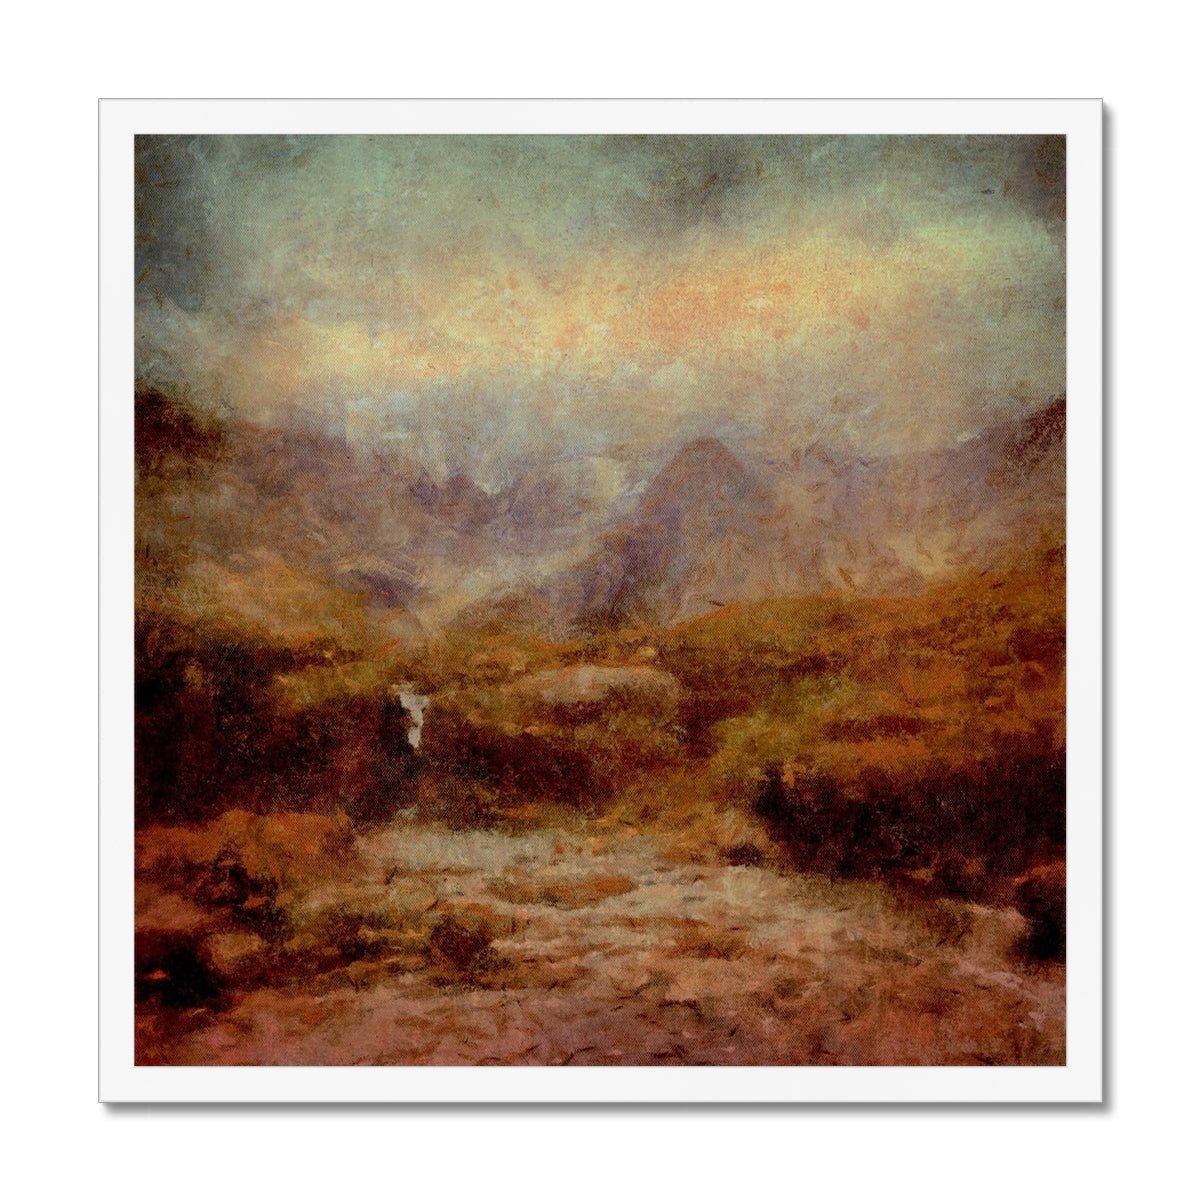 The Brooding Fairy Pools Skye Painting | Framed Prints From Scotland-Framed Prints-Skye Art Gallery-20"x20"-White Frame-Paintings, Prints, Homeware, Art Gifts From Scotland By Scottish Artist Kevin Hunter